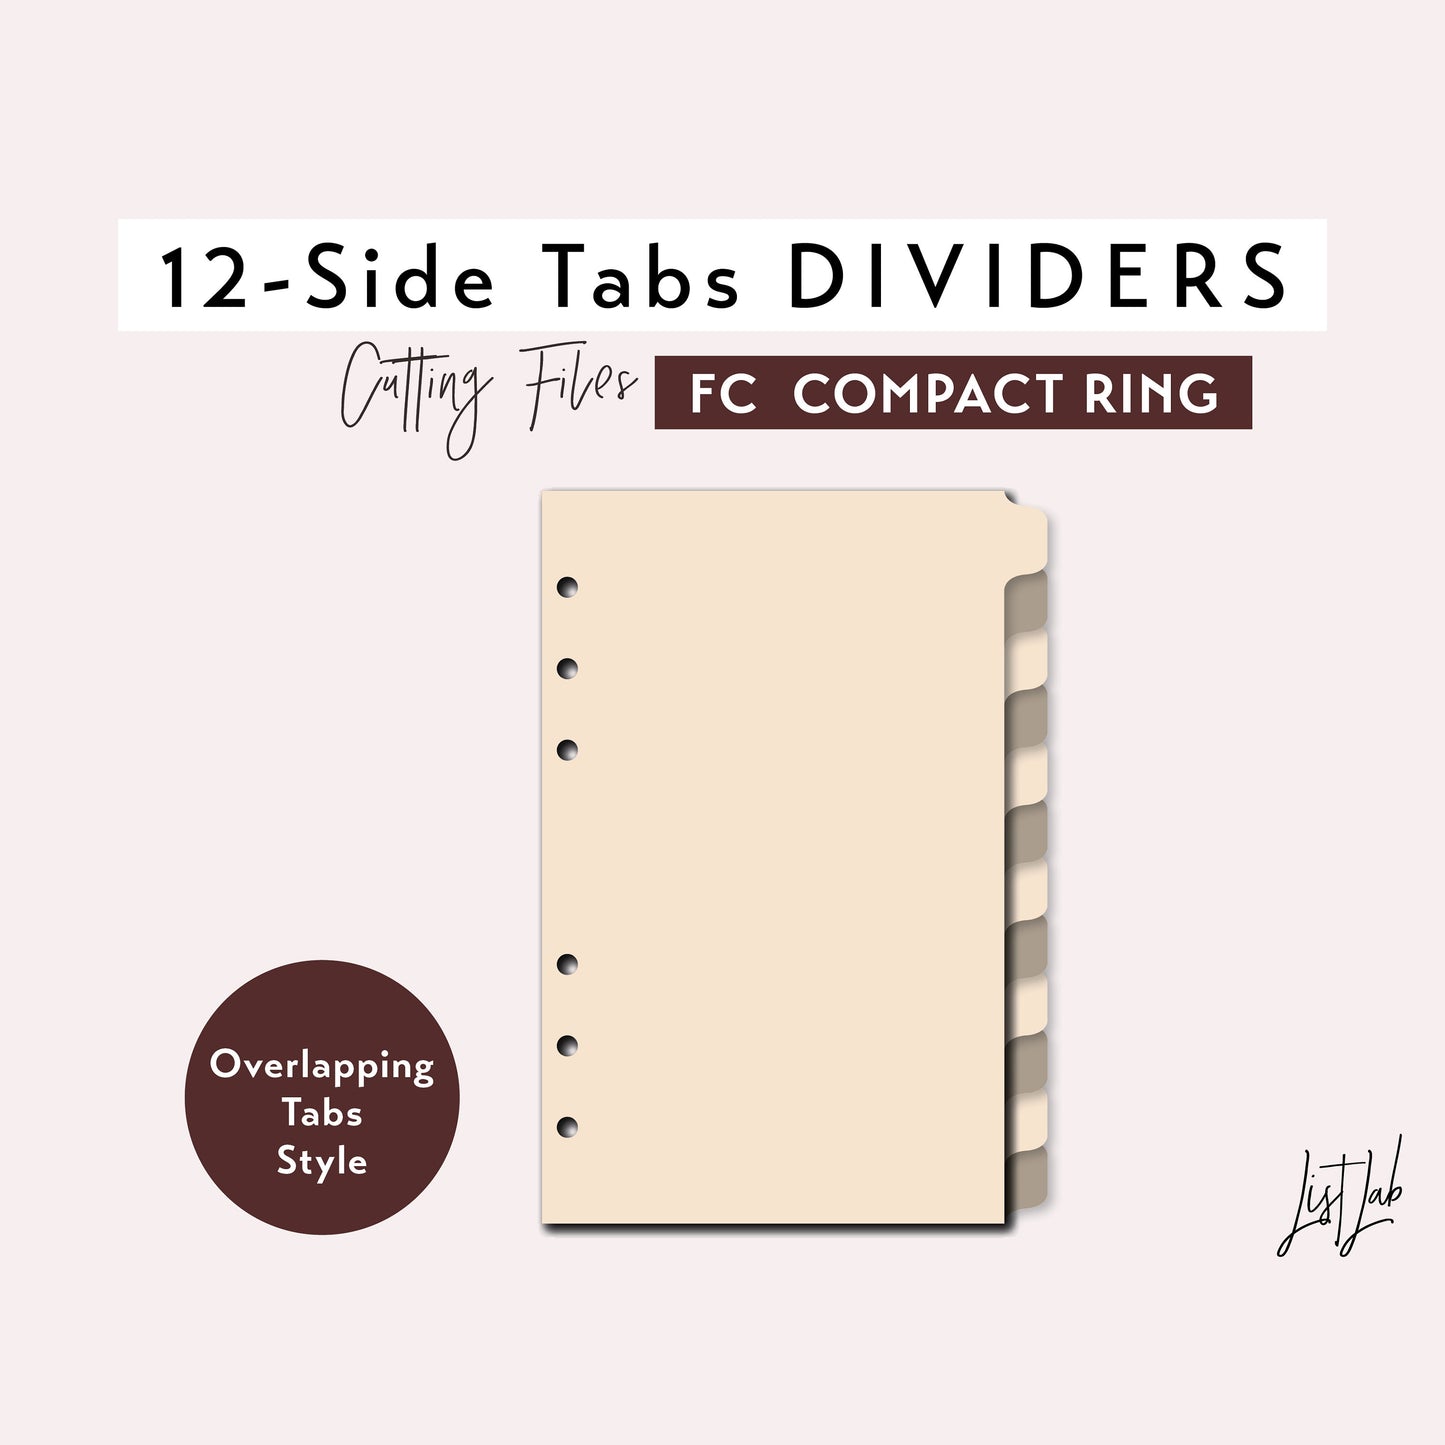 FC COMPACT Ring 12-SIDE Tab Dividers Cutting Files Set